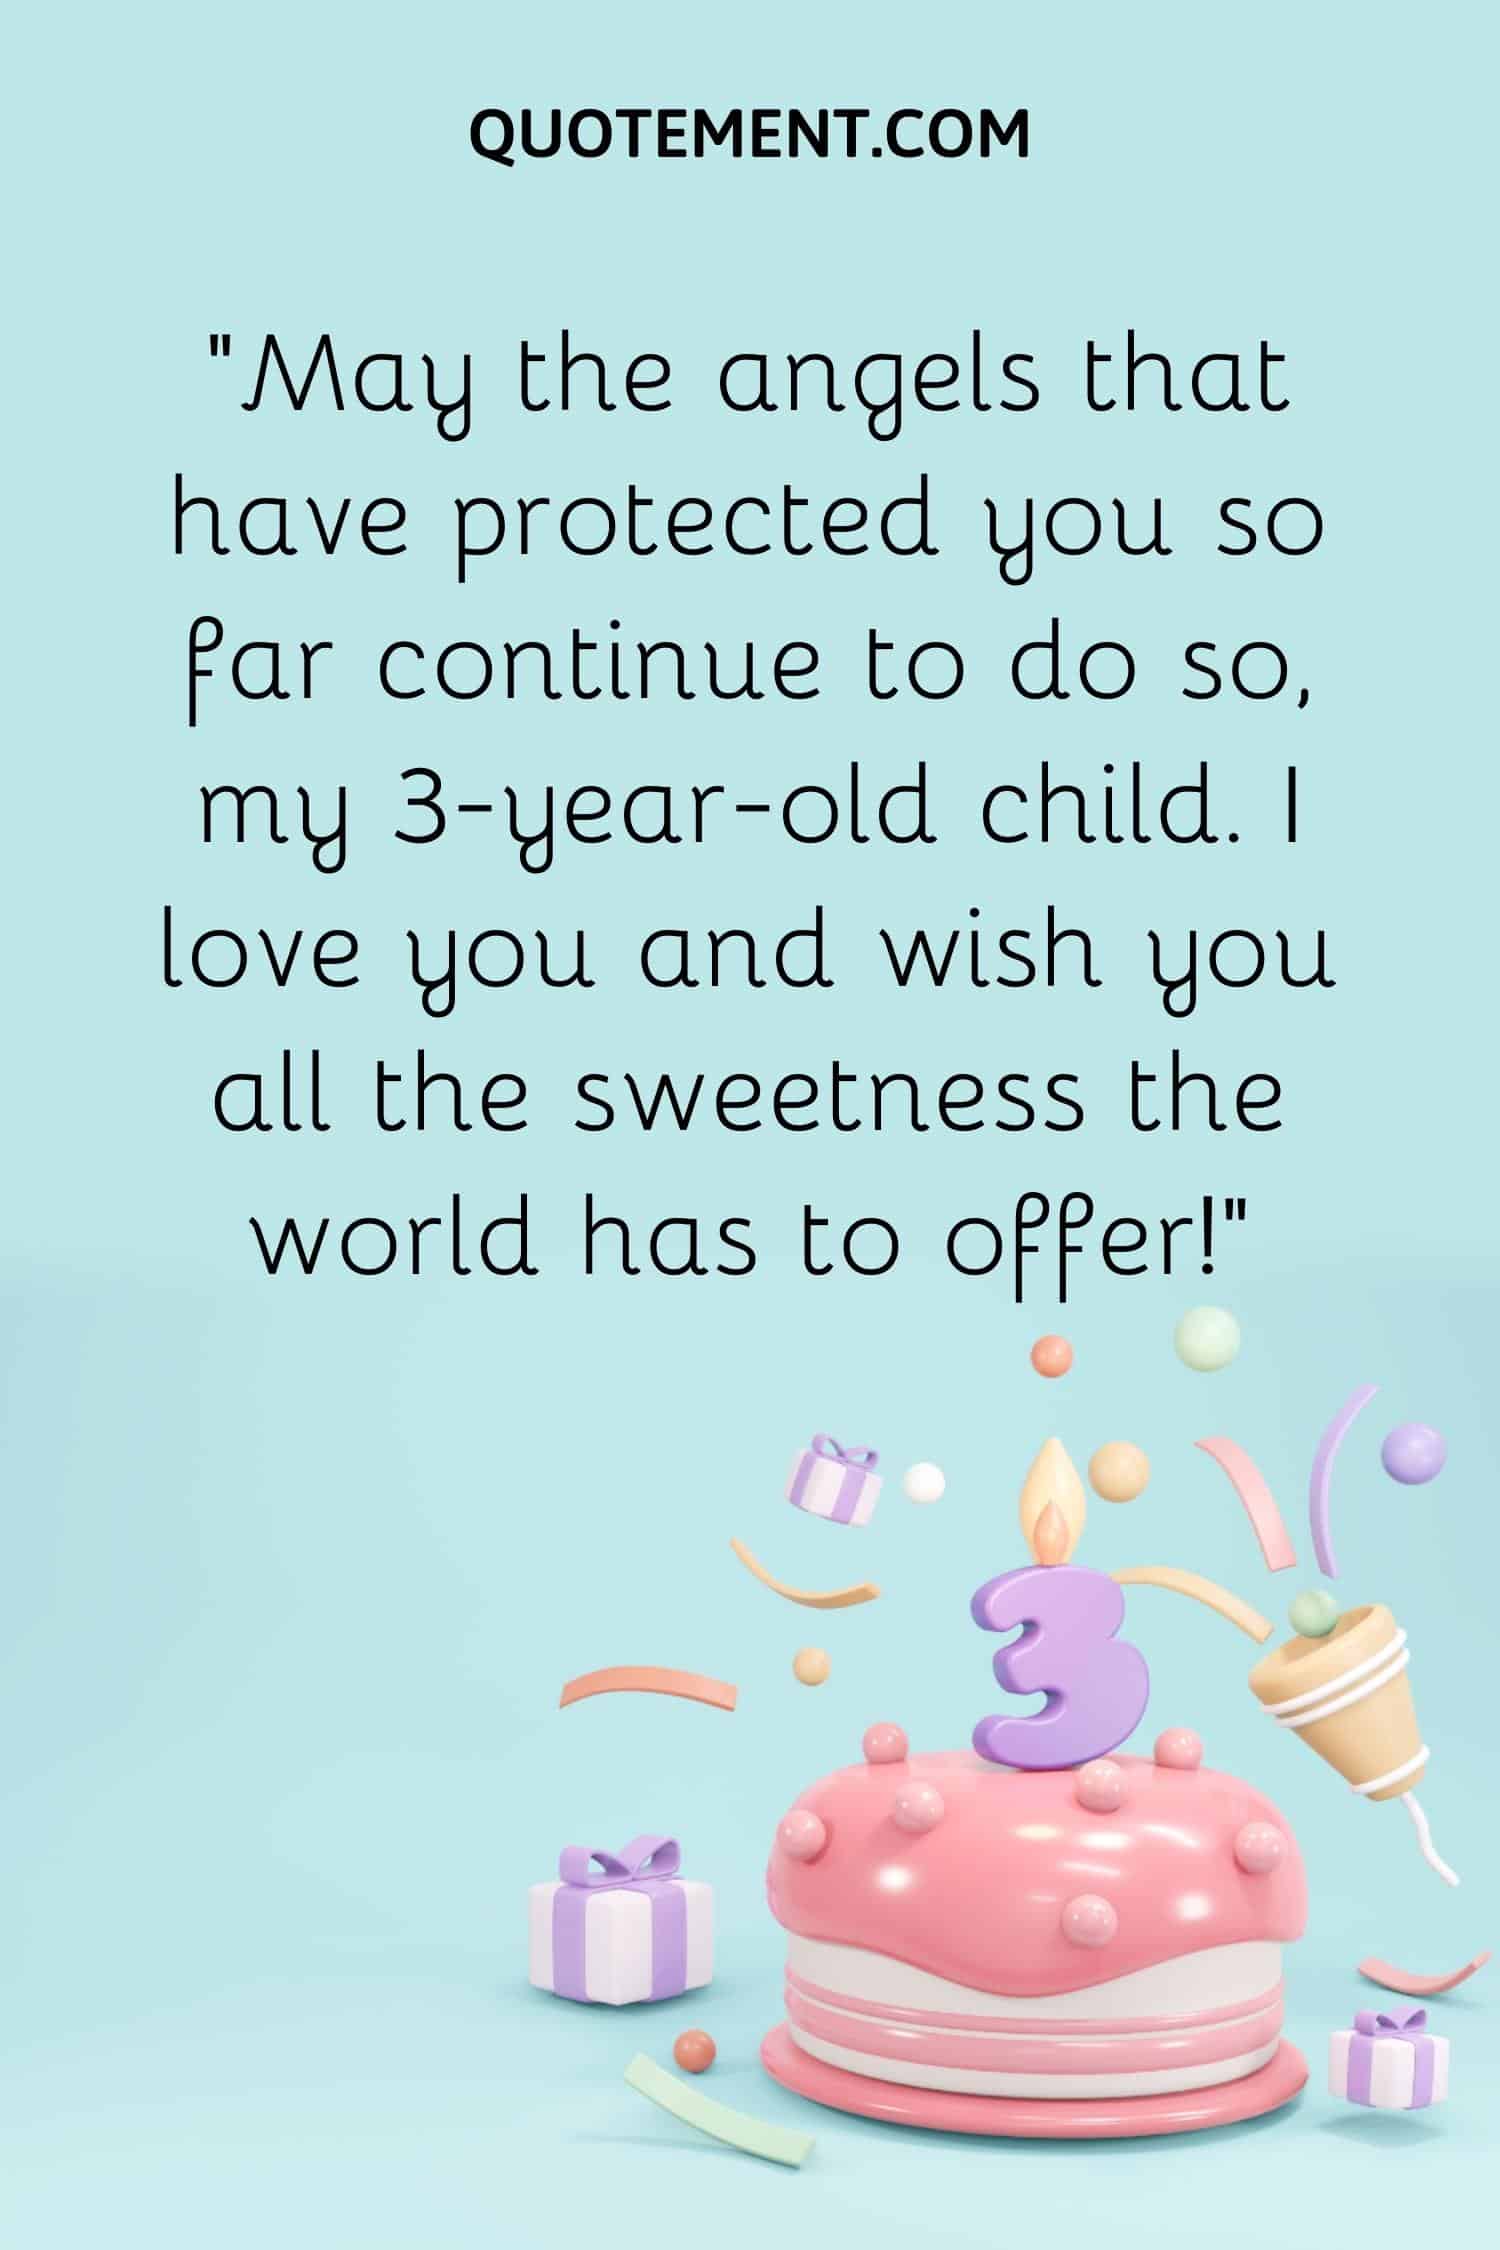 “May the angels that have protected you so far continue to do so, my 3-year-old child. I love you and wish you all the sweetness the world has to offer!”